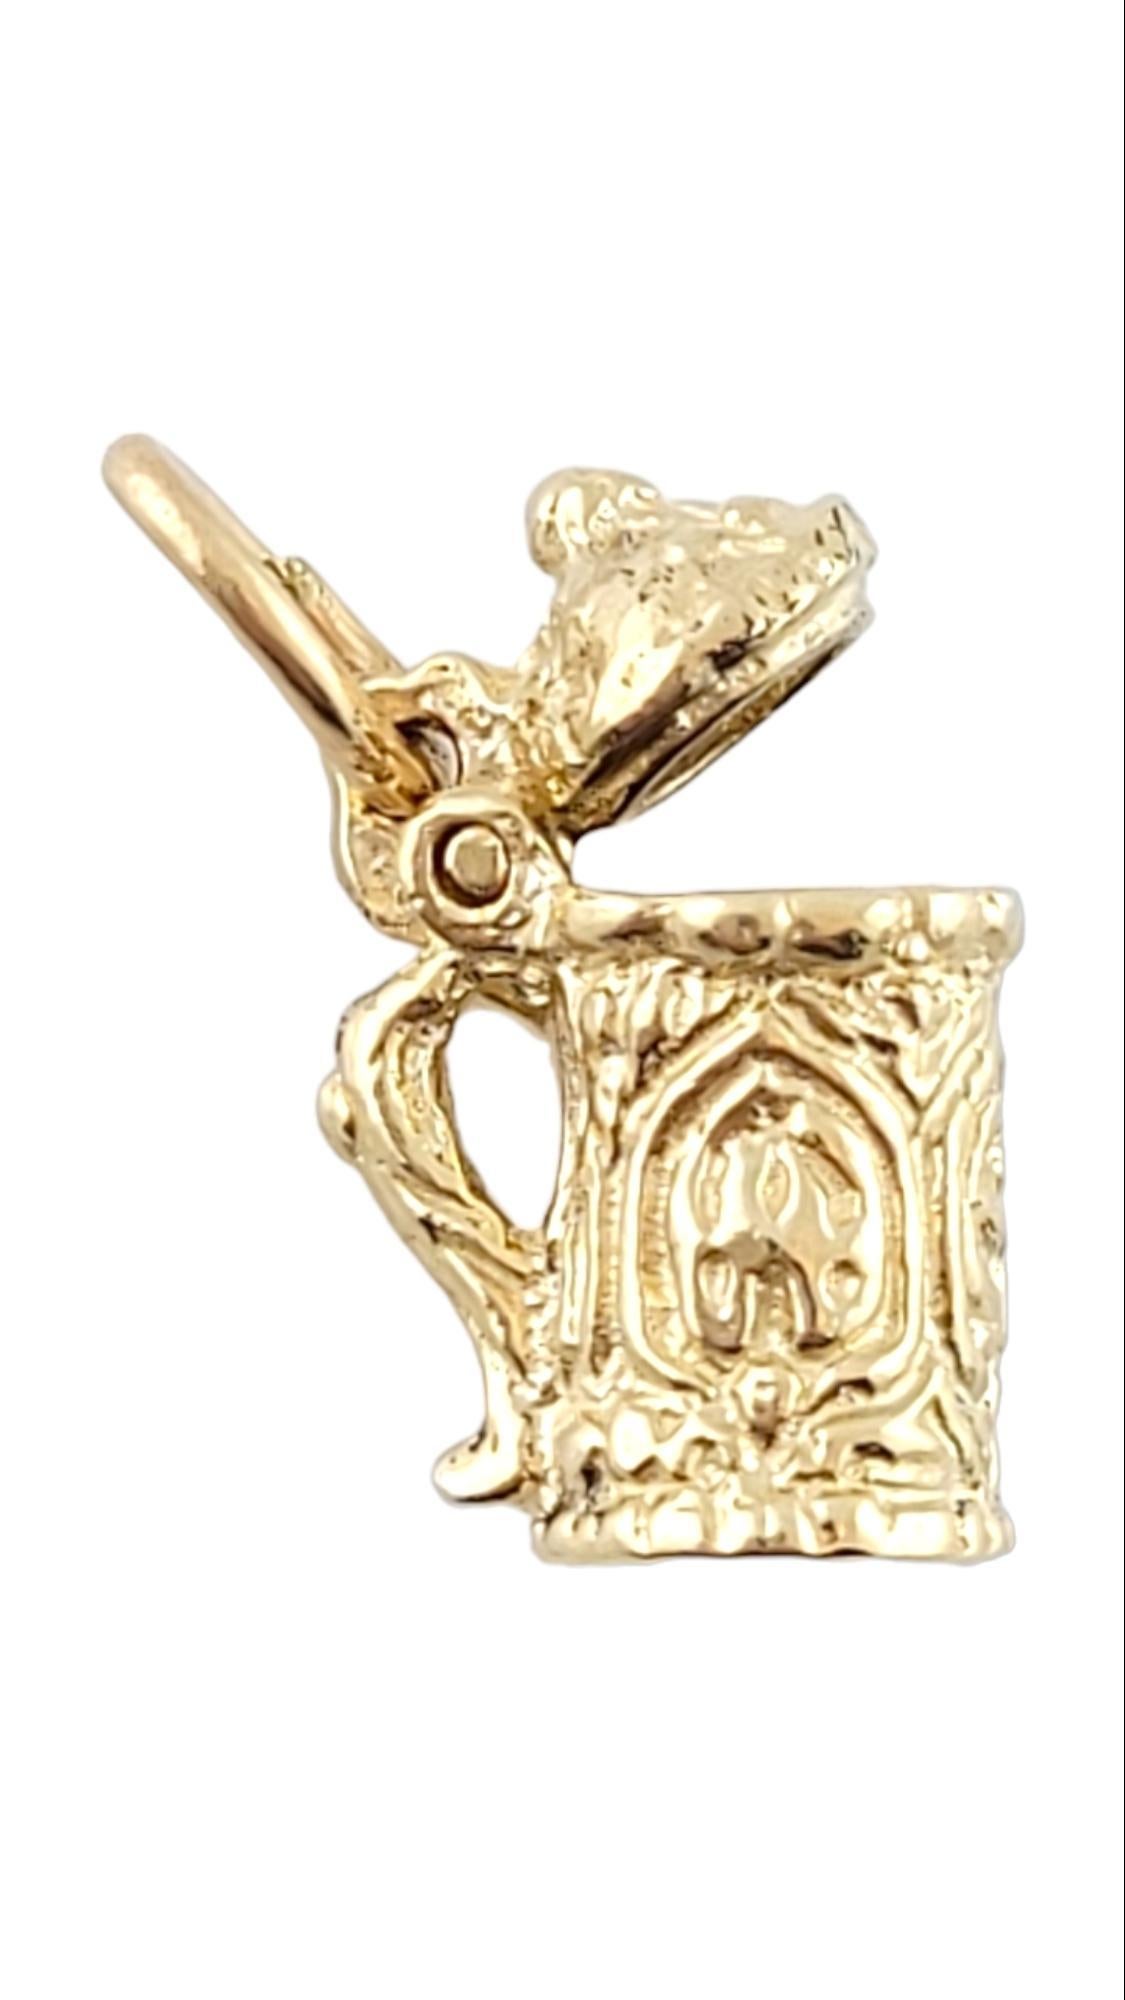 Vintage 18K Yellow Gold Beer Stein Charm -  

This charm portrays Germany and Oktoberfest. It's a classic charm crafted in beautifully detailed 14K yellow gold. 

Size: 12.7mmX9.3mm

Stamped: 18K 

Weight: 2.0g / 1.2dwt

Very good condition,